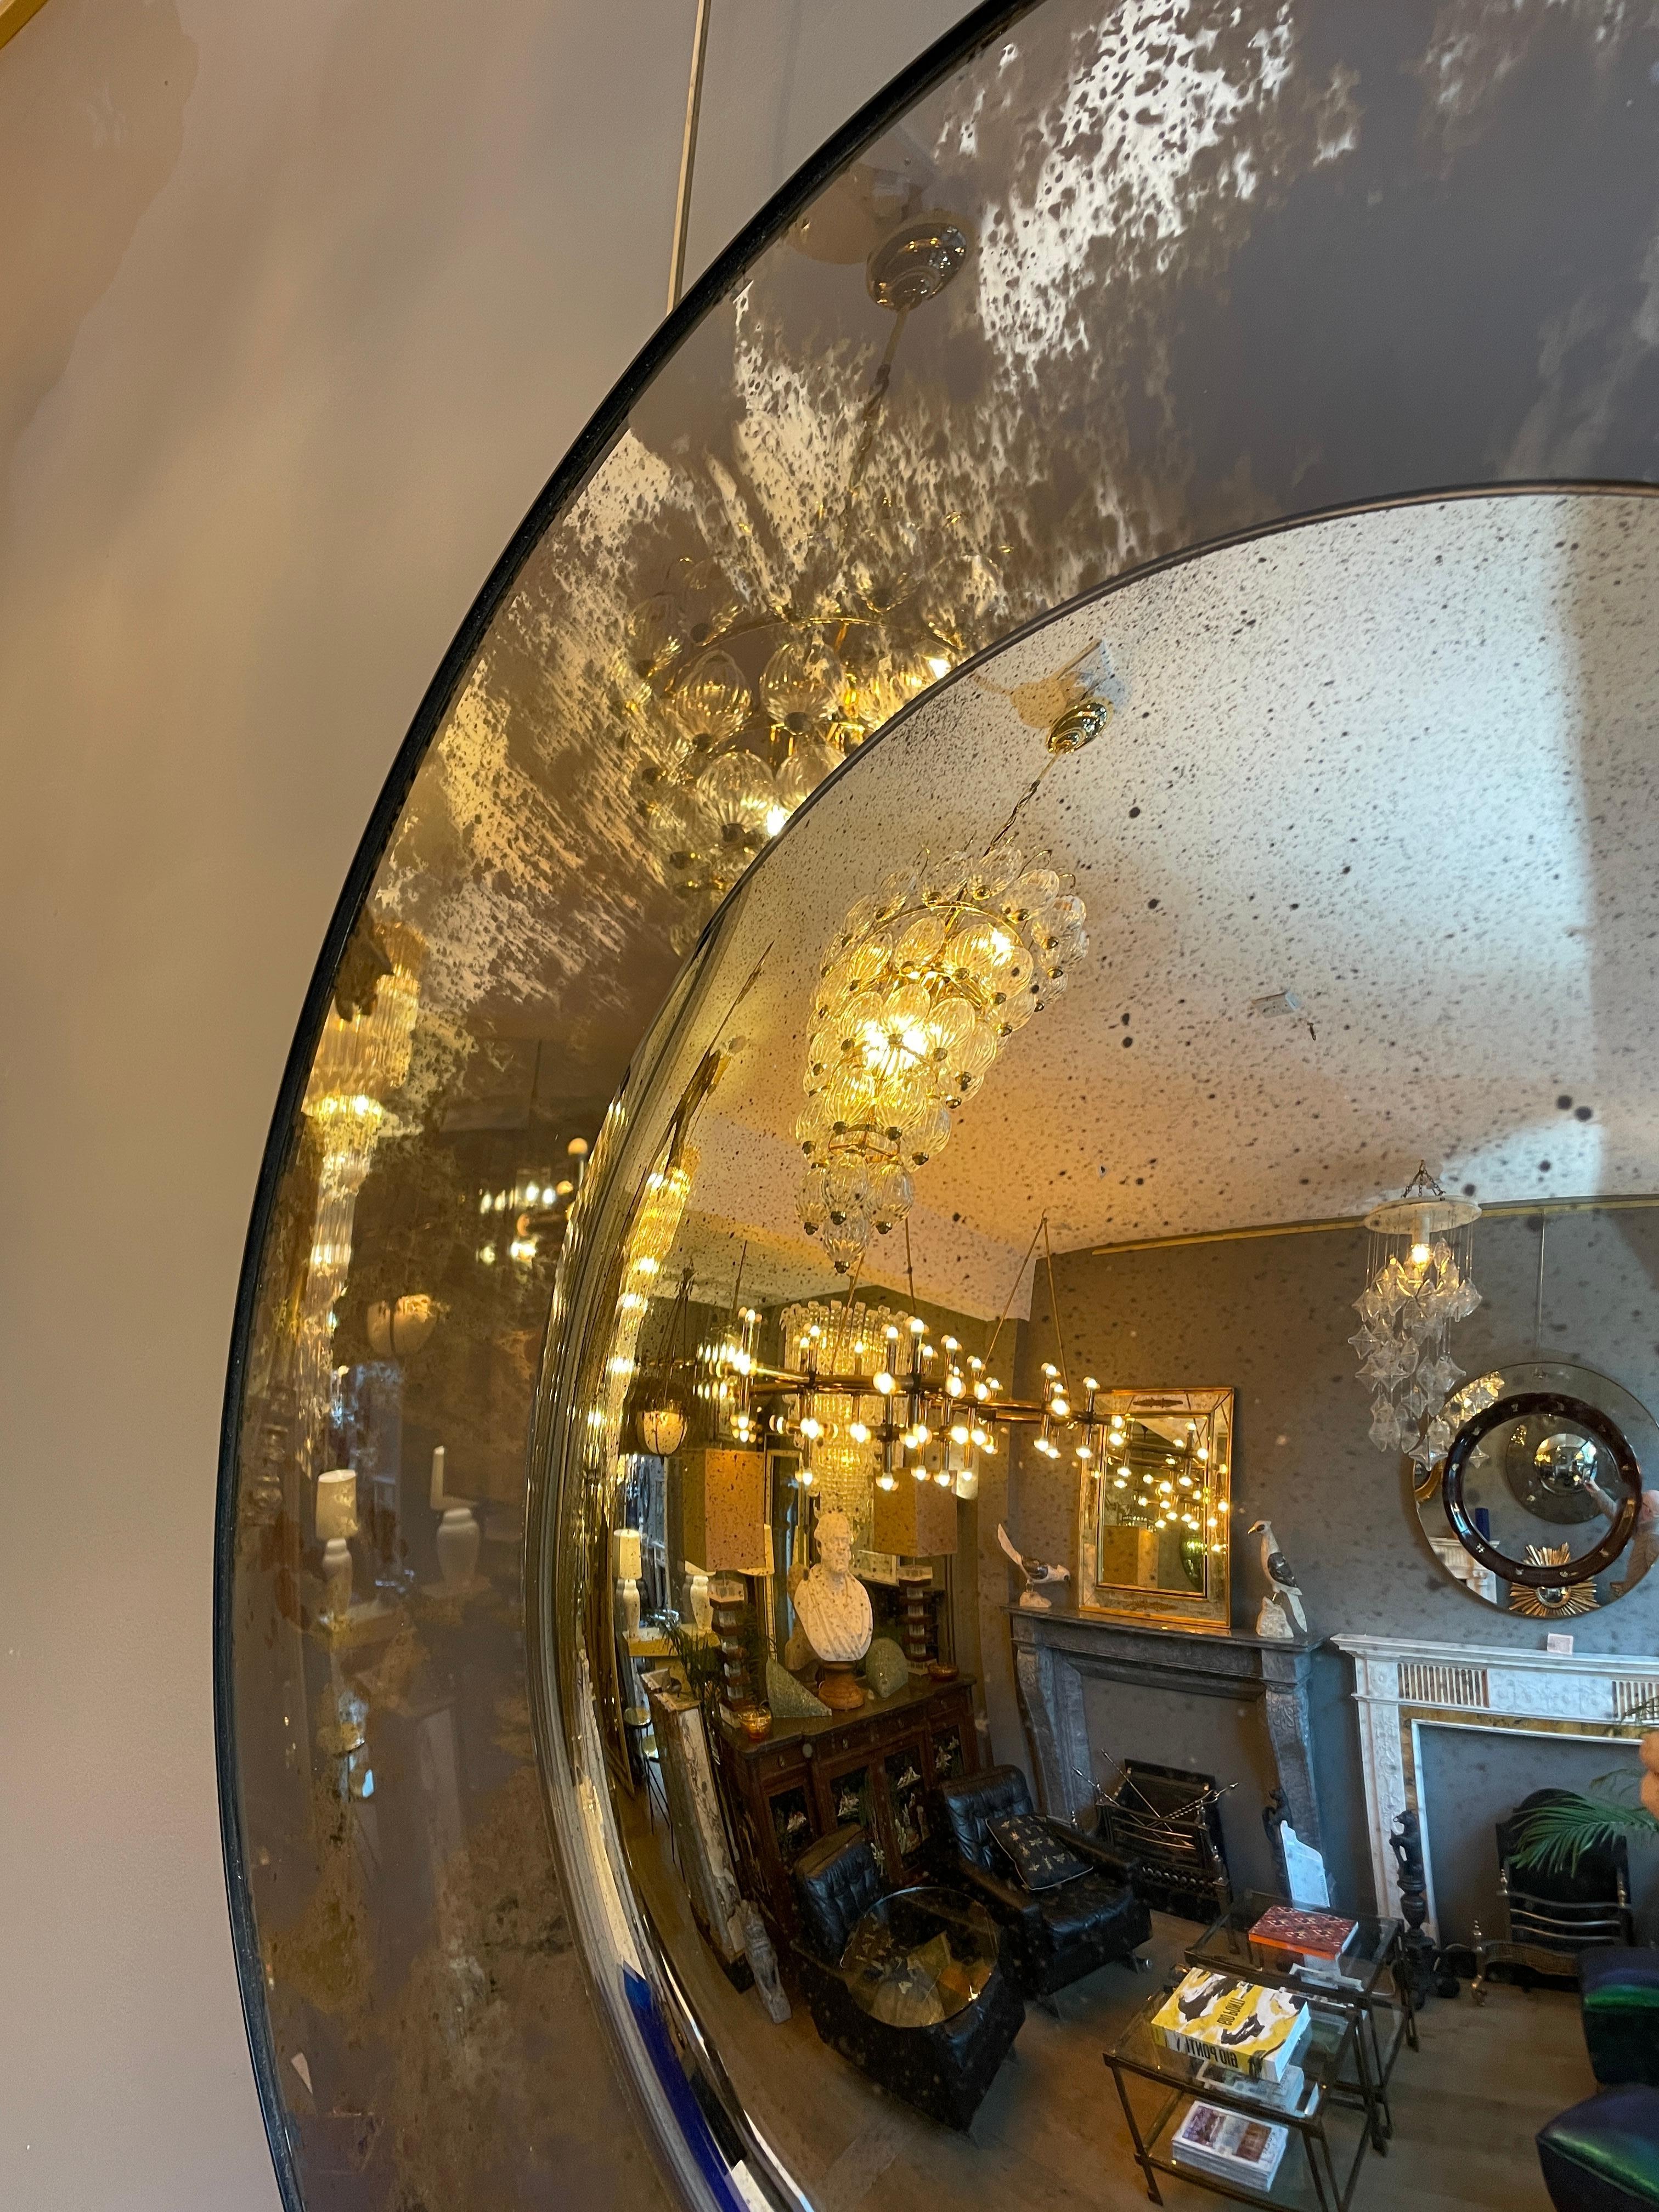 A pair of large circular convex mirror, with outer convex in very distressed silver mirror, with inner convex less distressed, with a bronze banded frame finish.